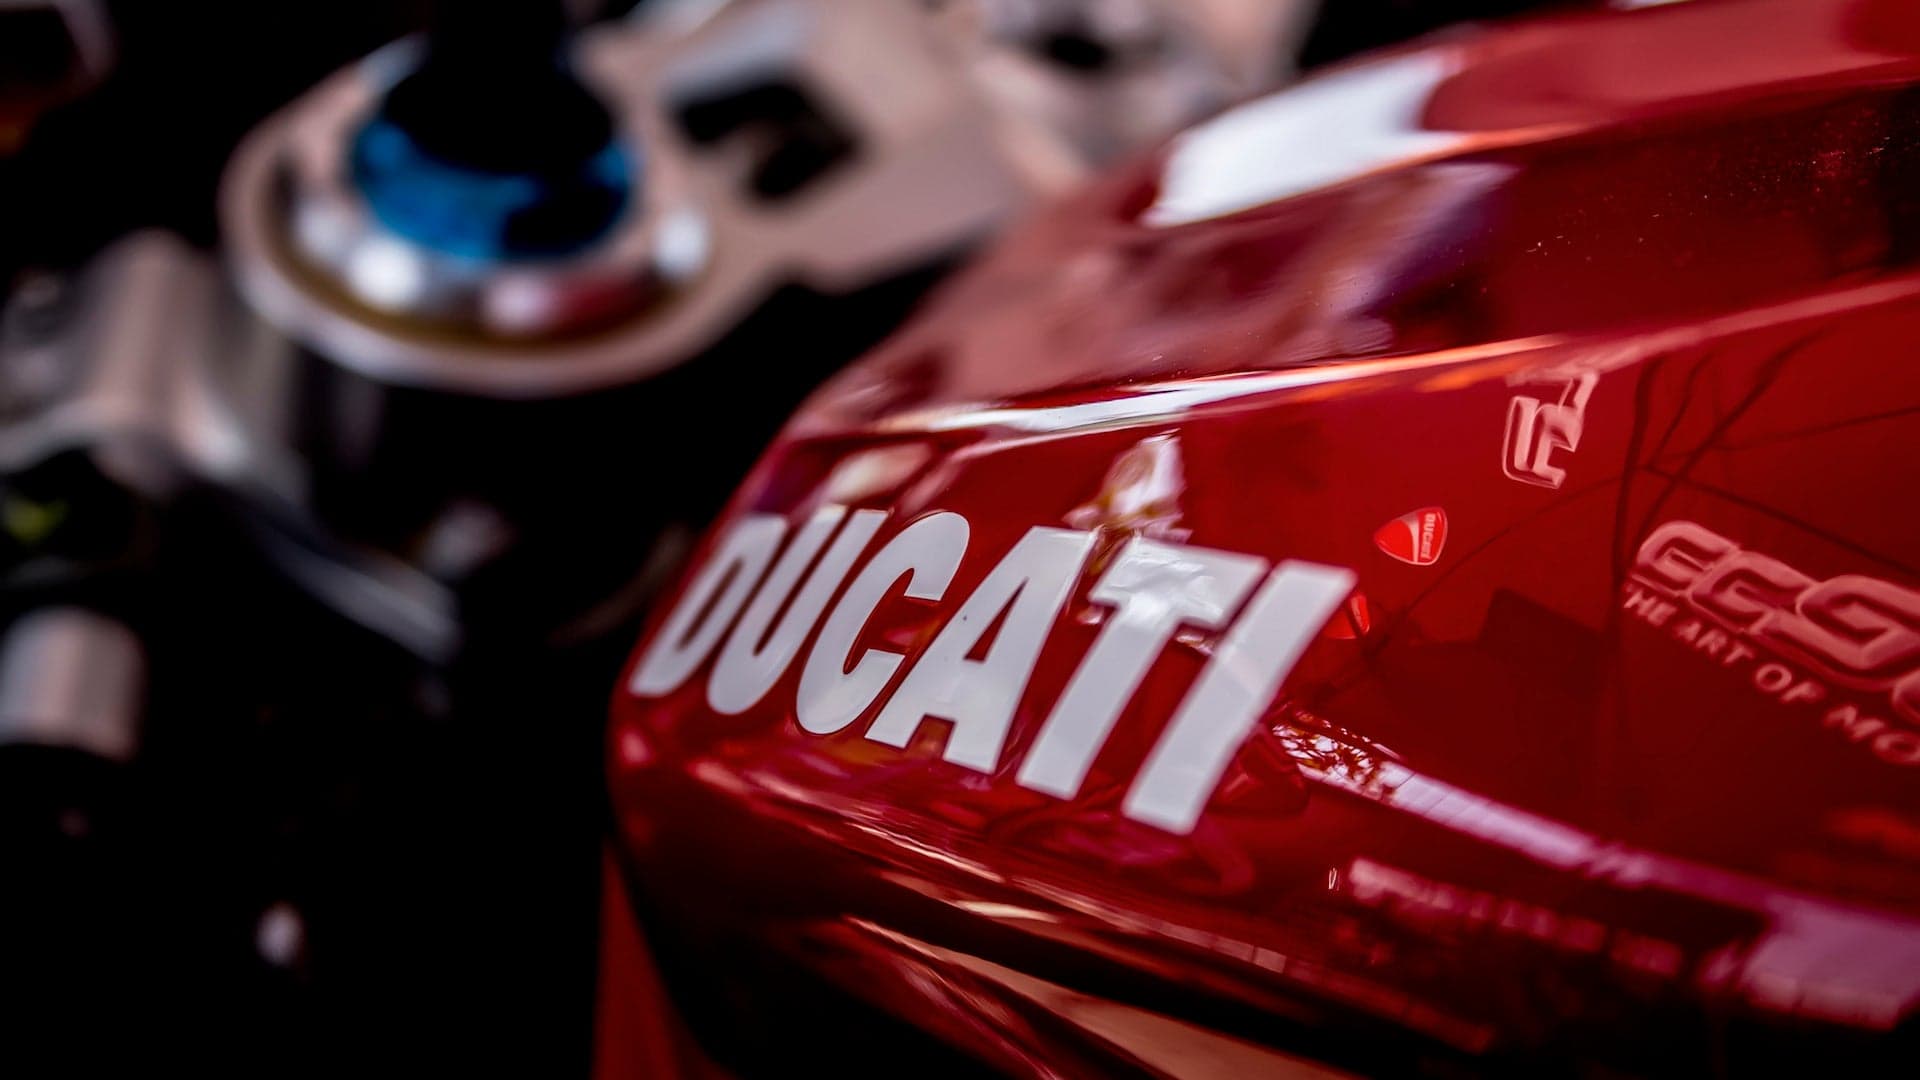 Teenage Hackers Buy Ducati After Stealing $300,000 in Airline Tickets